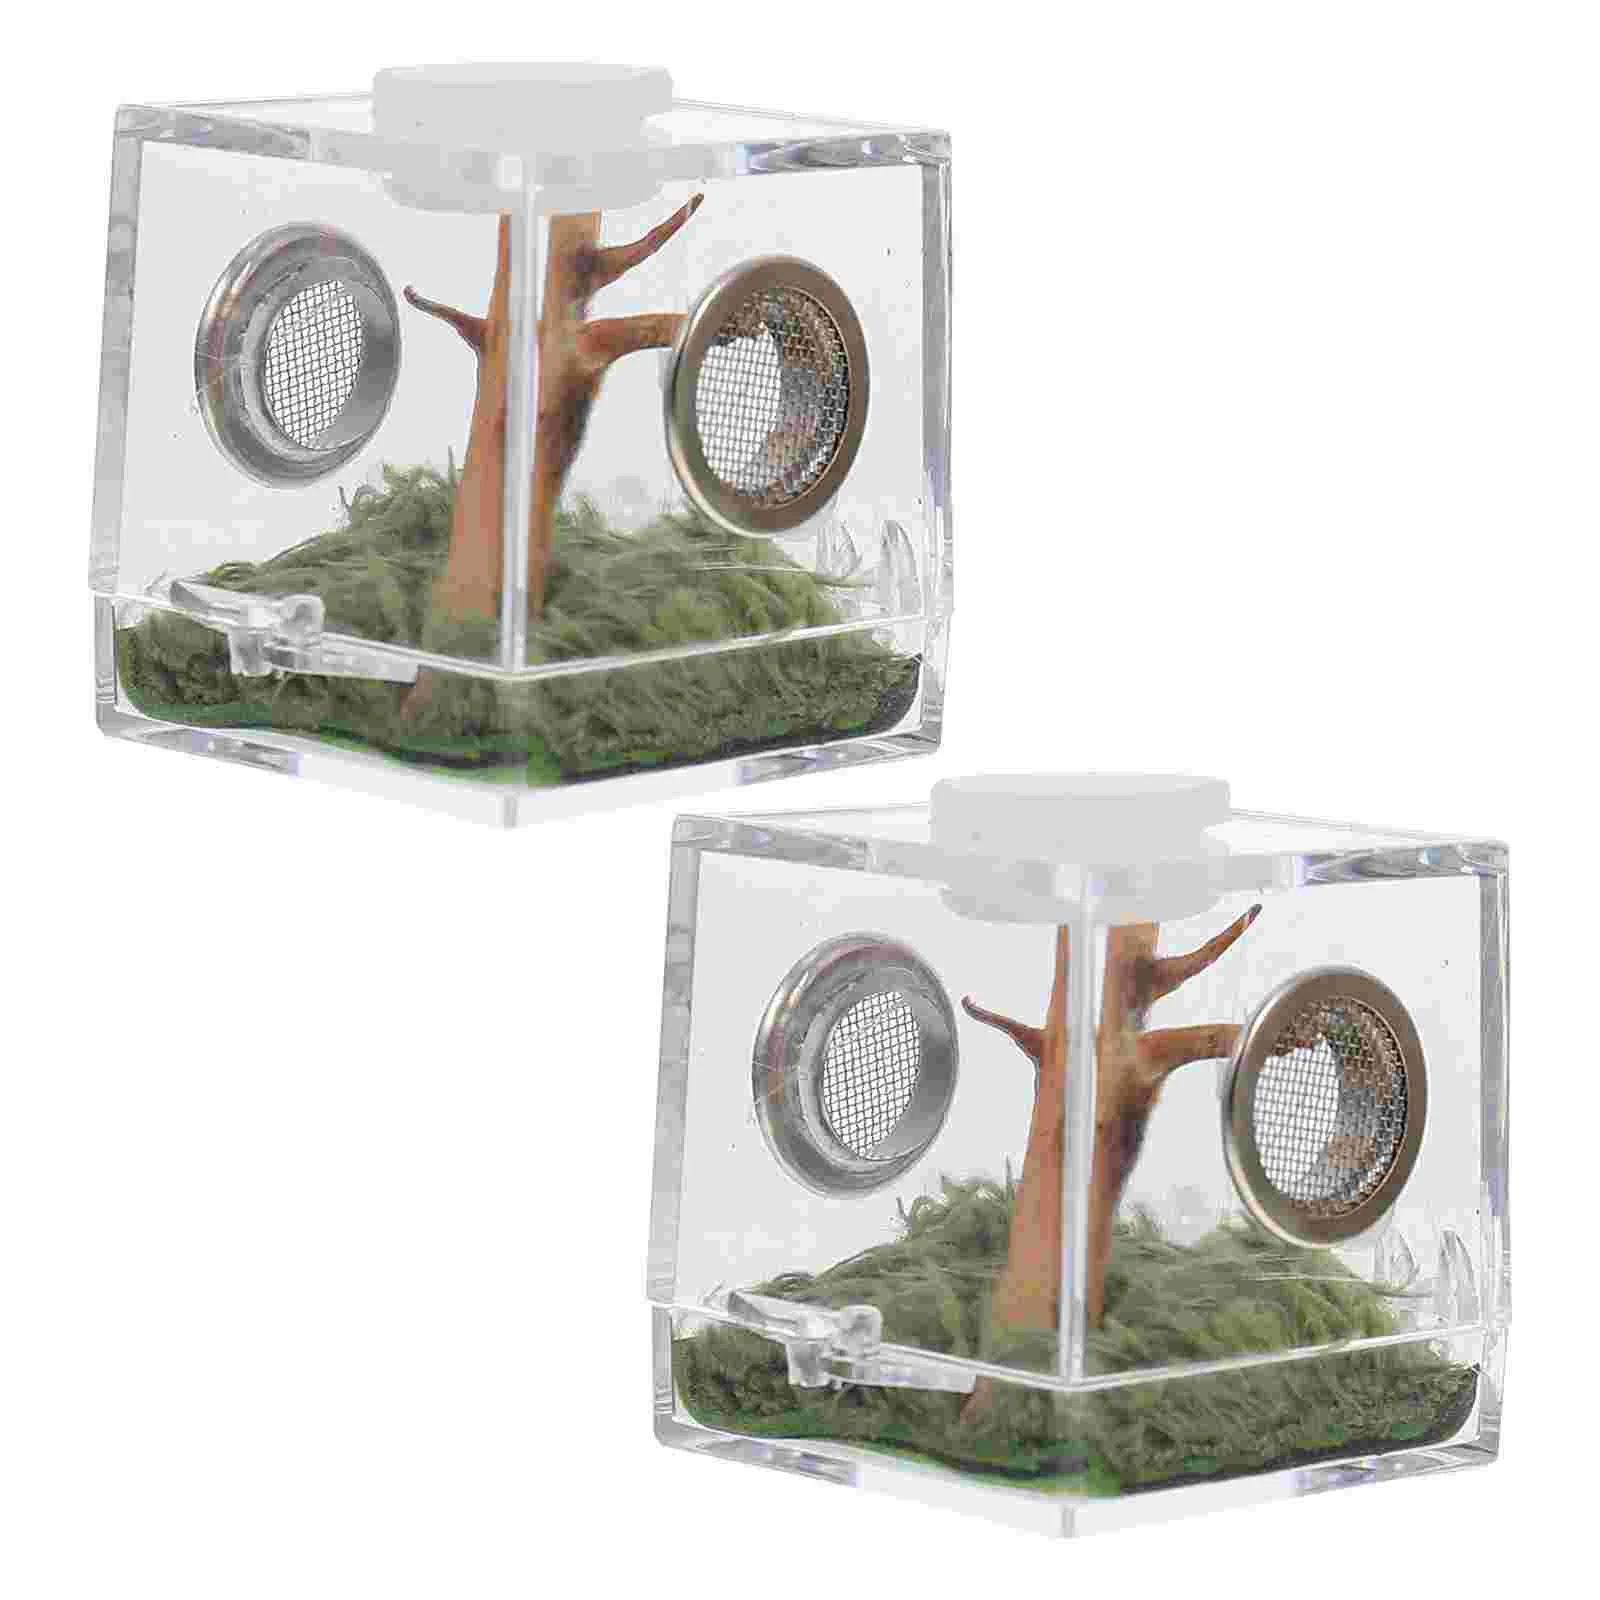 

2 Set Jumping Spider Breeding Box Reptiles Spider Dropper Reptile Clear Tank Box Gecko Spider Feeding Box Acrylic Spider Tong